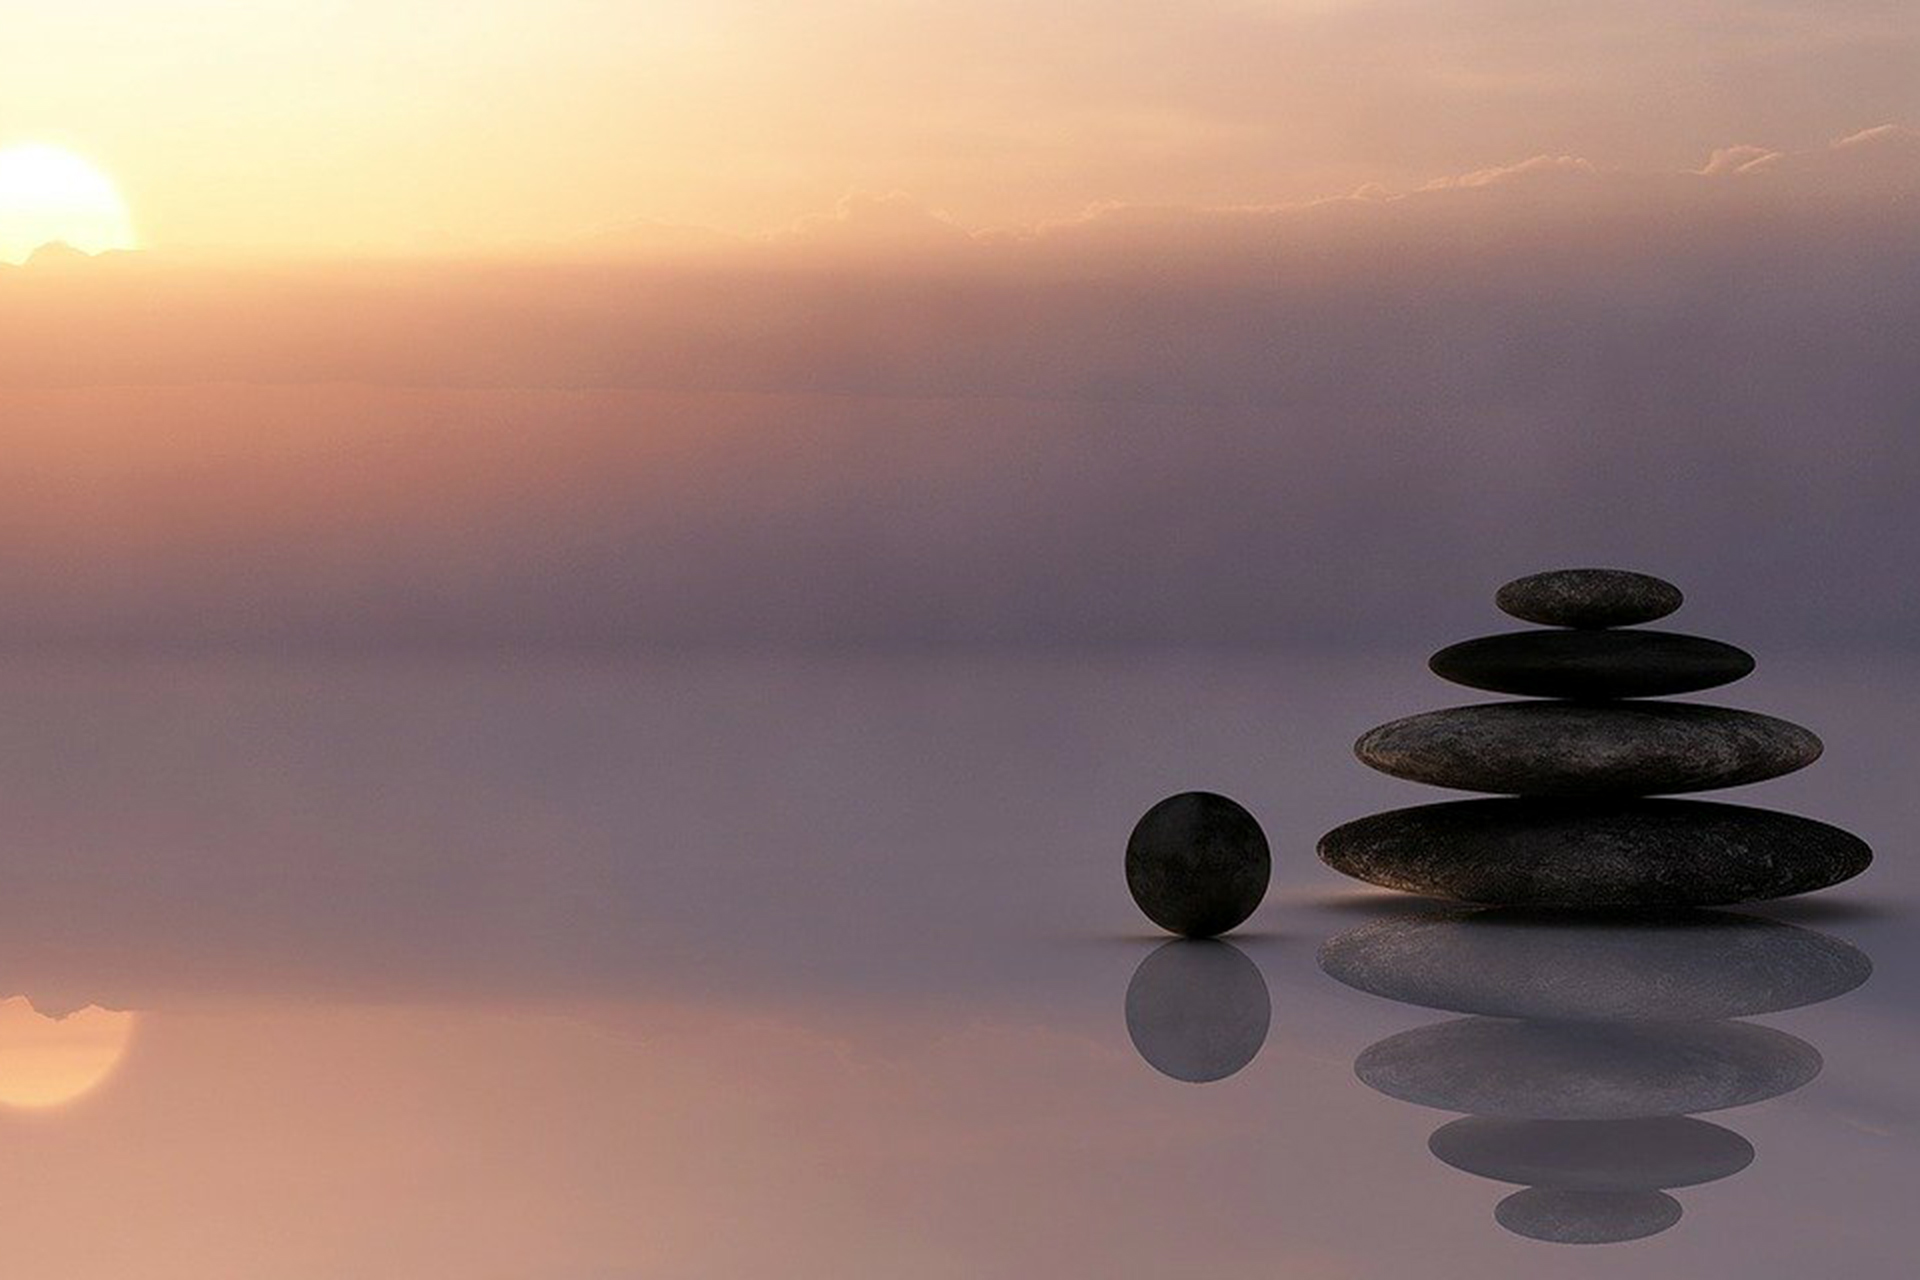 Serene and calming image of water and stones